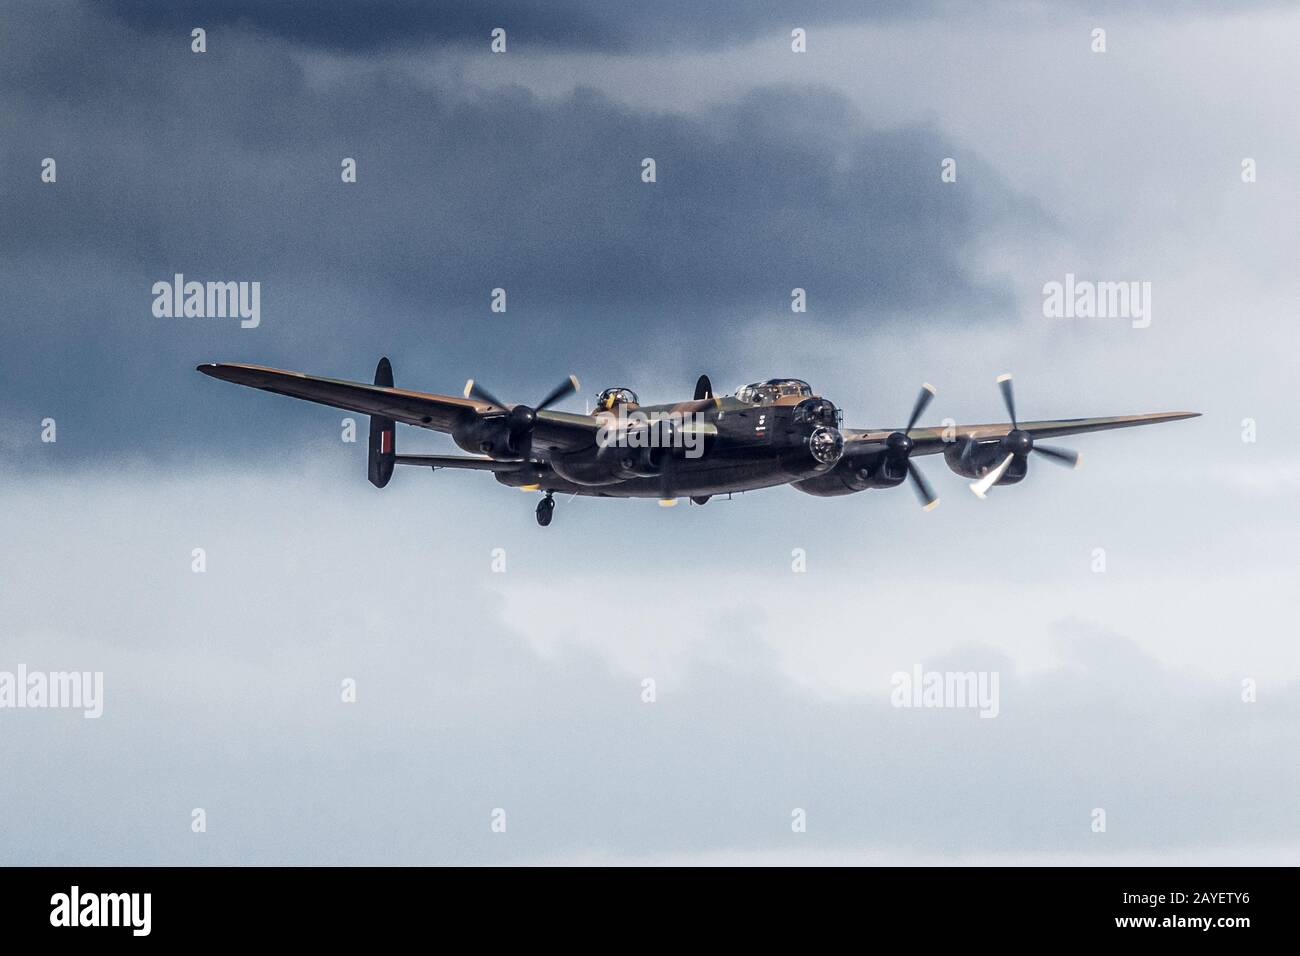 Royal Air Force Battle of Britain Memorial Flight Lancaster B2 bomber at the Newcastle Festival of Flight, Northern Ireland, 2014 Stock Photo